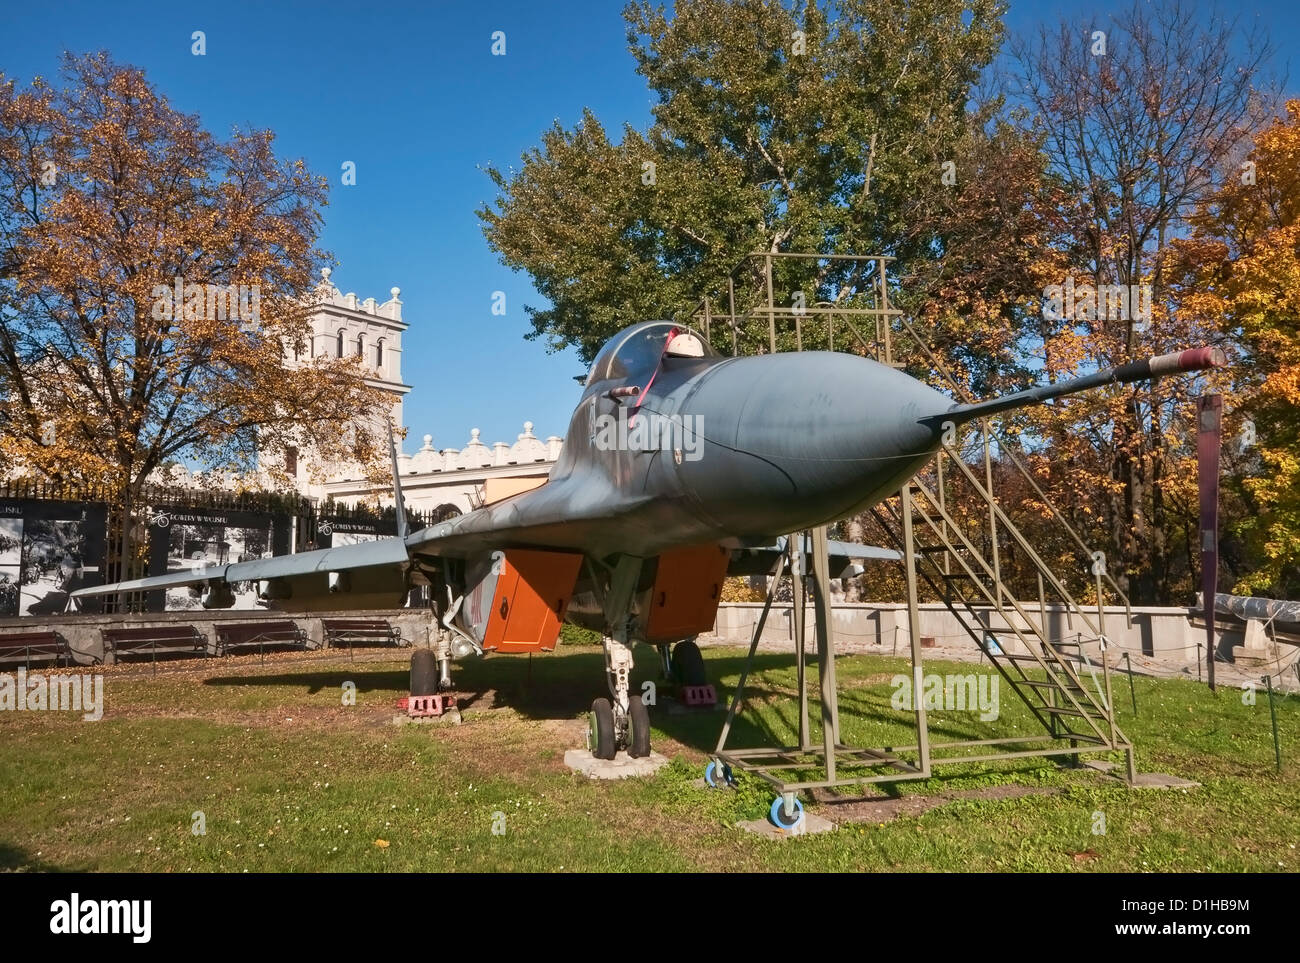 Mikoyan MiG-29, Soviet jet fighter aircraft, Polish Army Museum in Warsaw, Poland Stock Photo